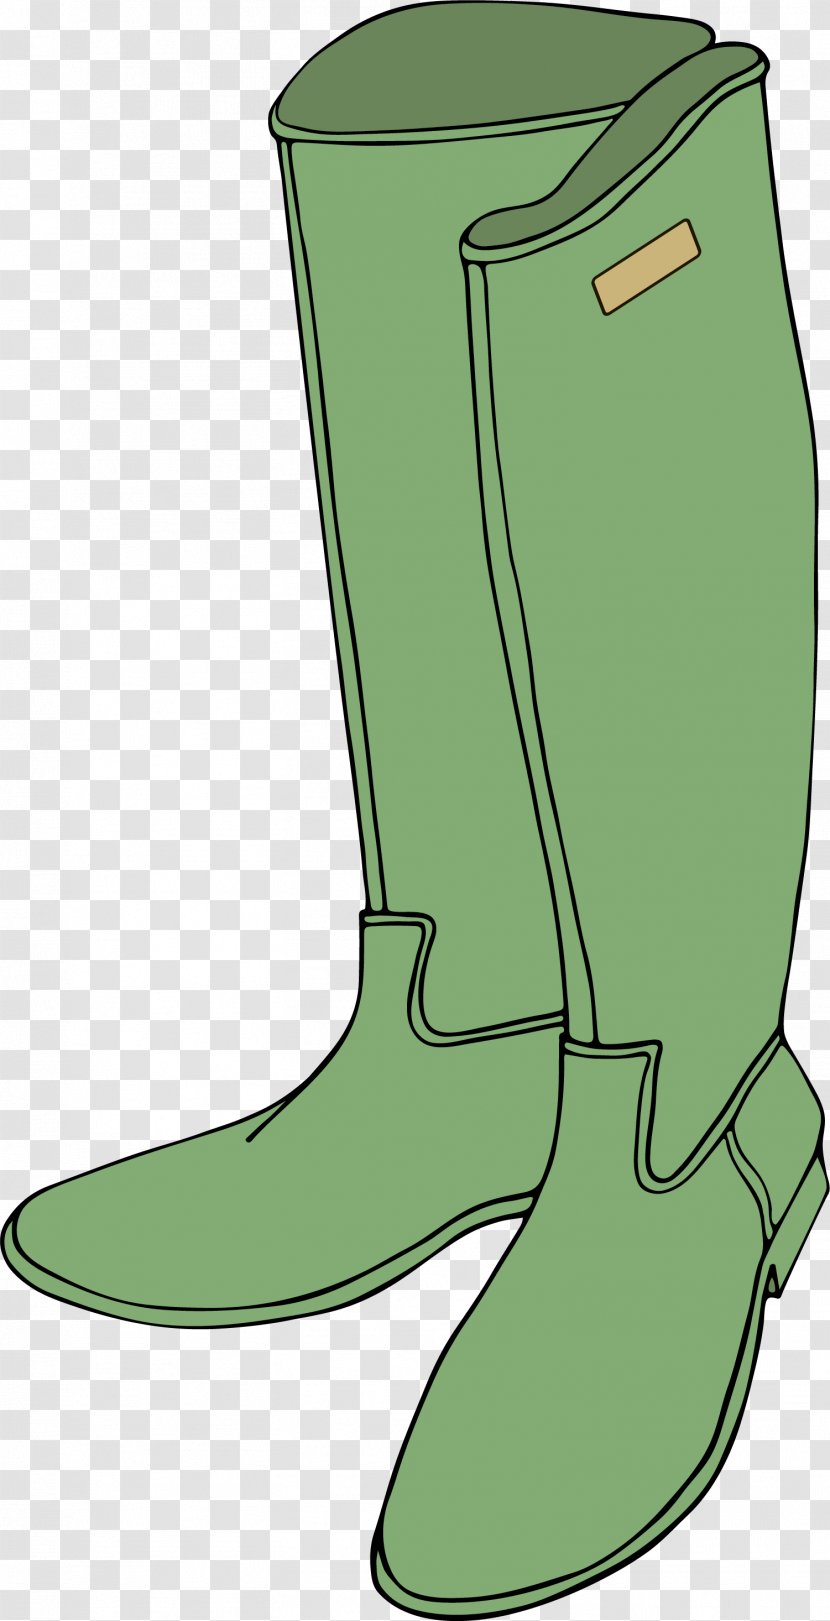 Riding Boot - Grass - Hand Painted Green Boots Transparent PNG